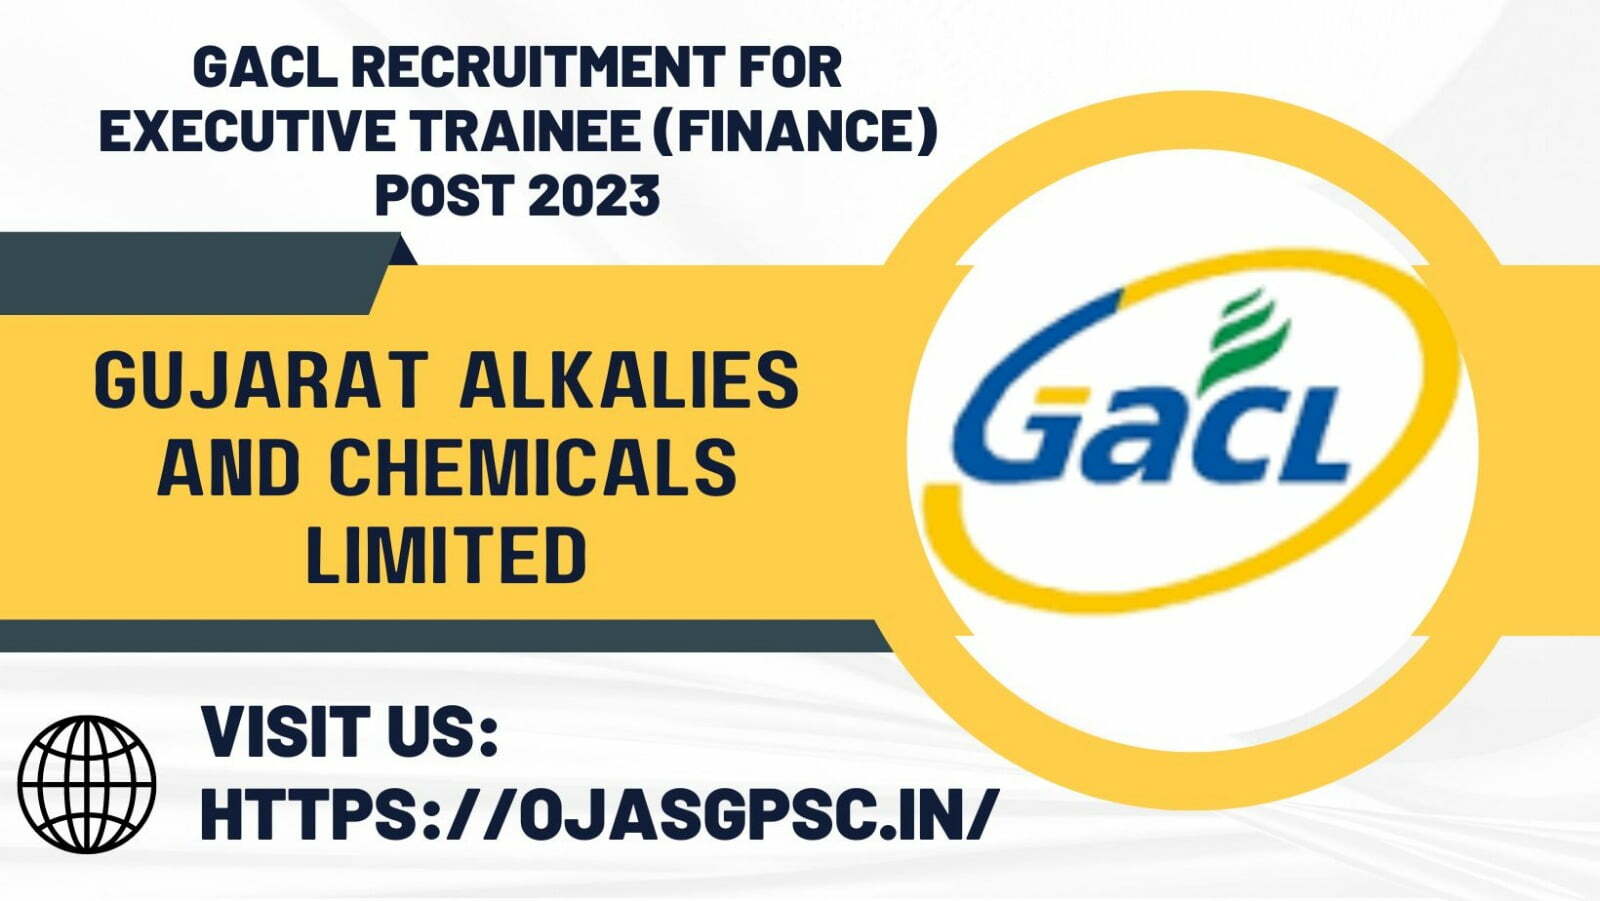 GACL Recruitment for Executive Trainee (Finance) Post 2023